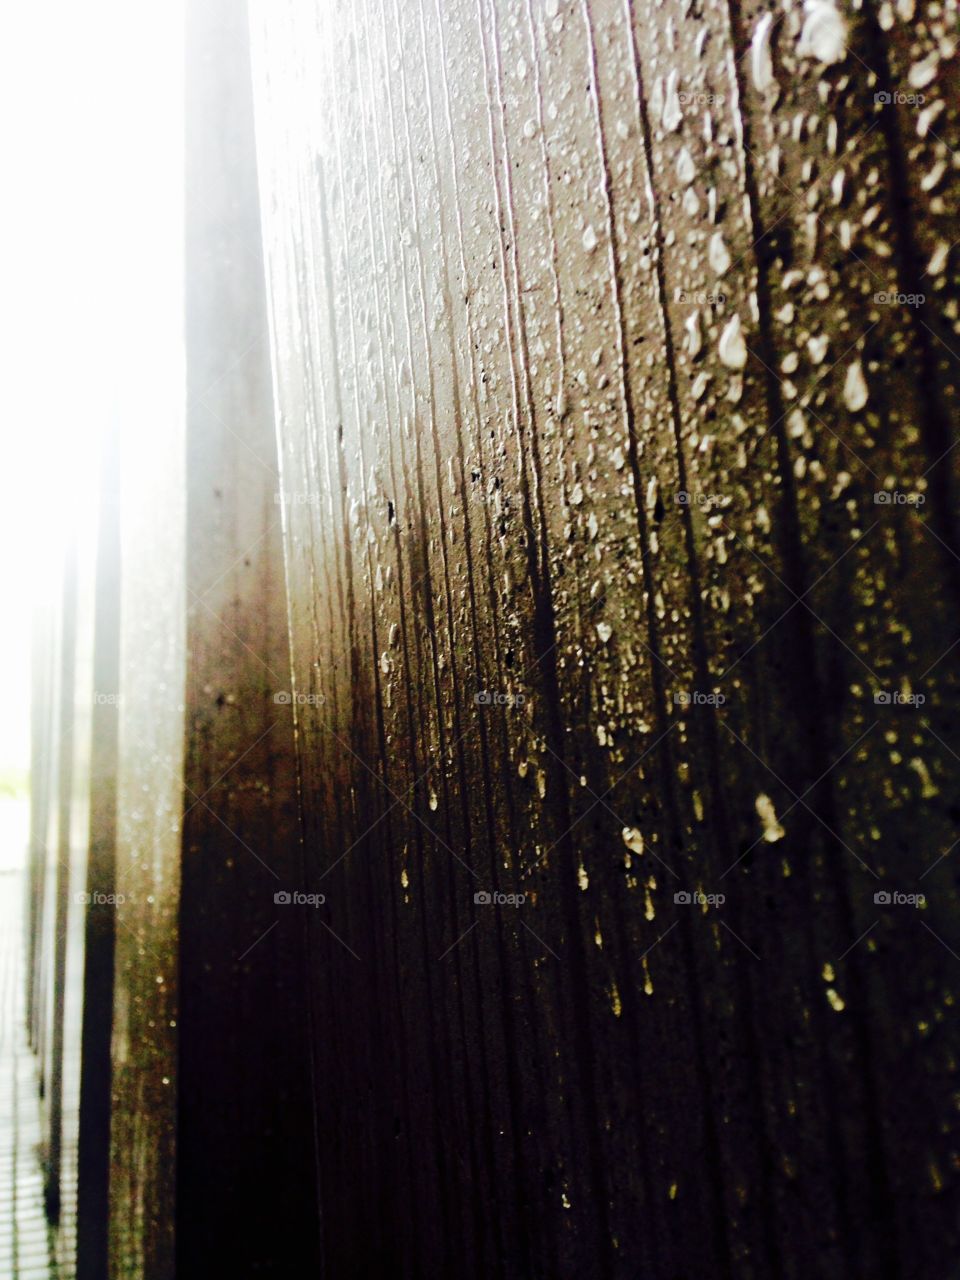 Weeping Stone. Mist condensed into the holocaust memorial in Germany. 